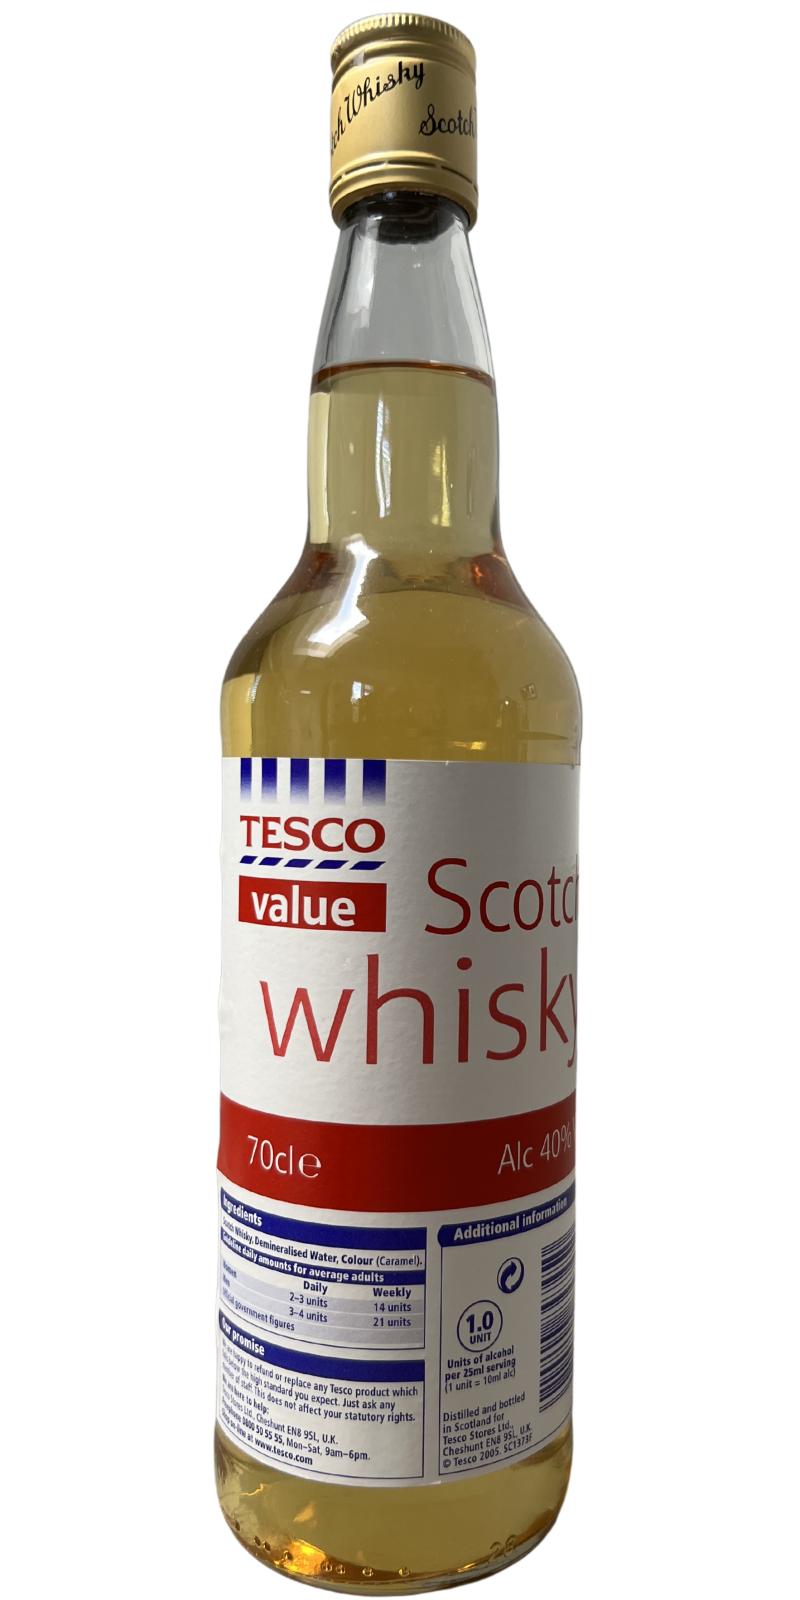 Scotch Guard Finest Blended Scotch Whisky - Ratings and reviews - Whiskybase